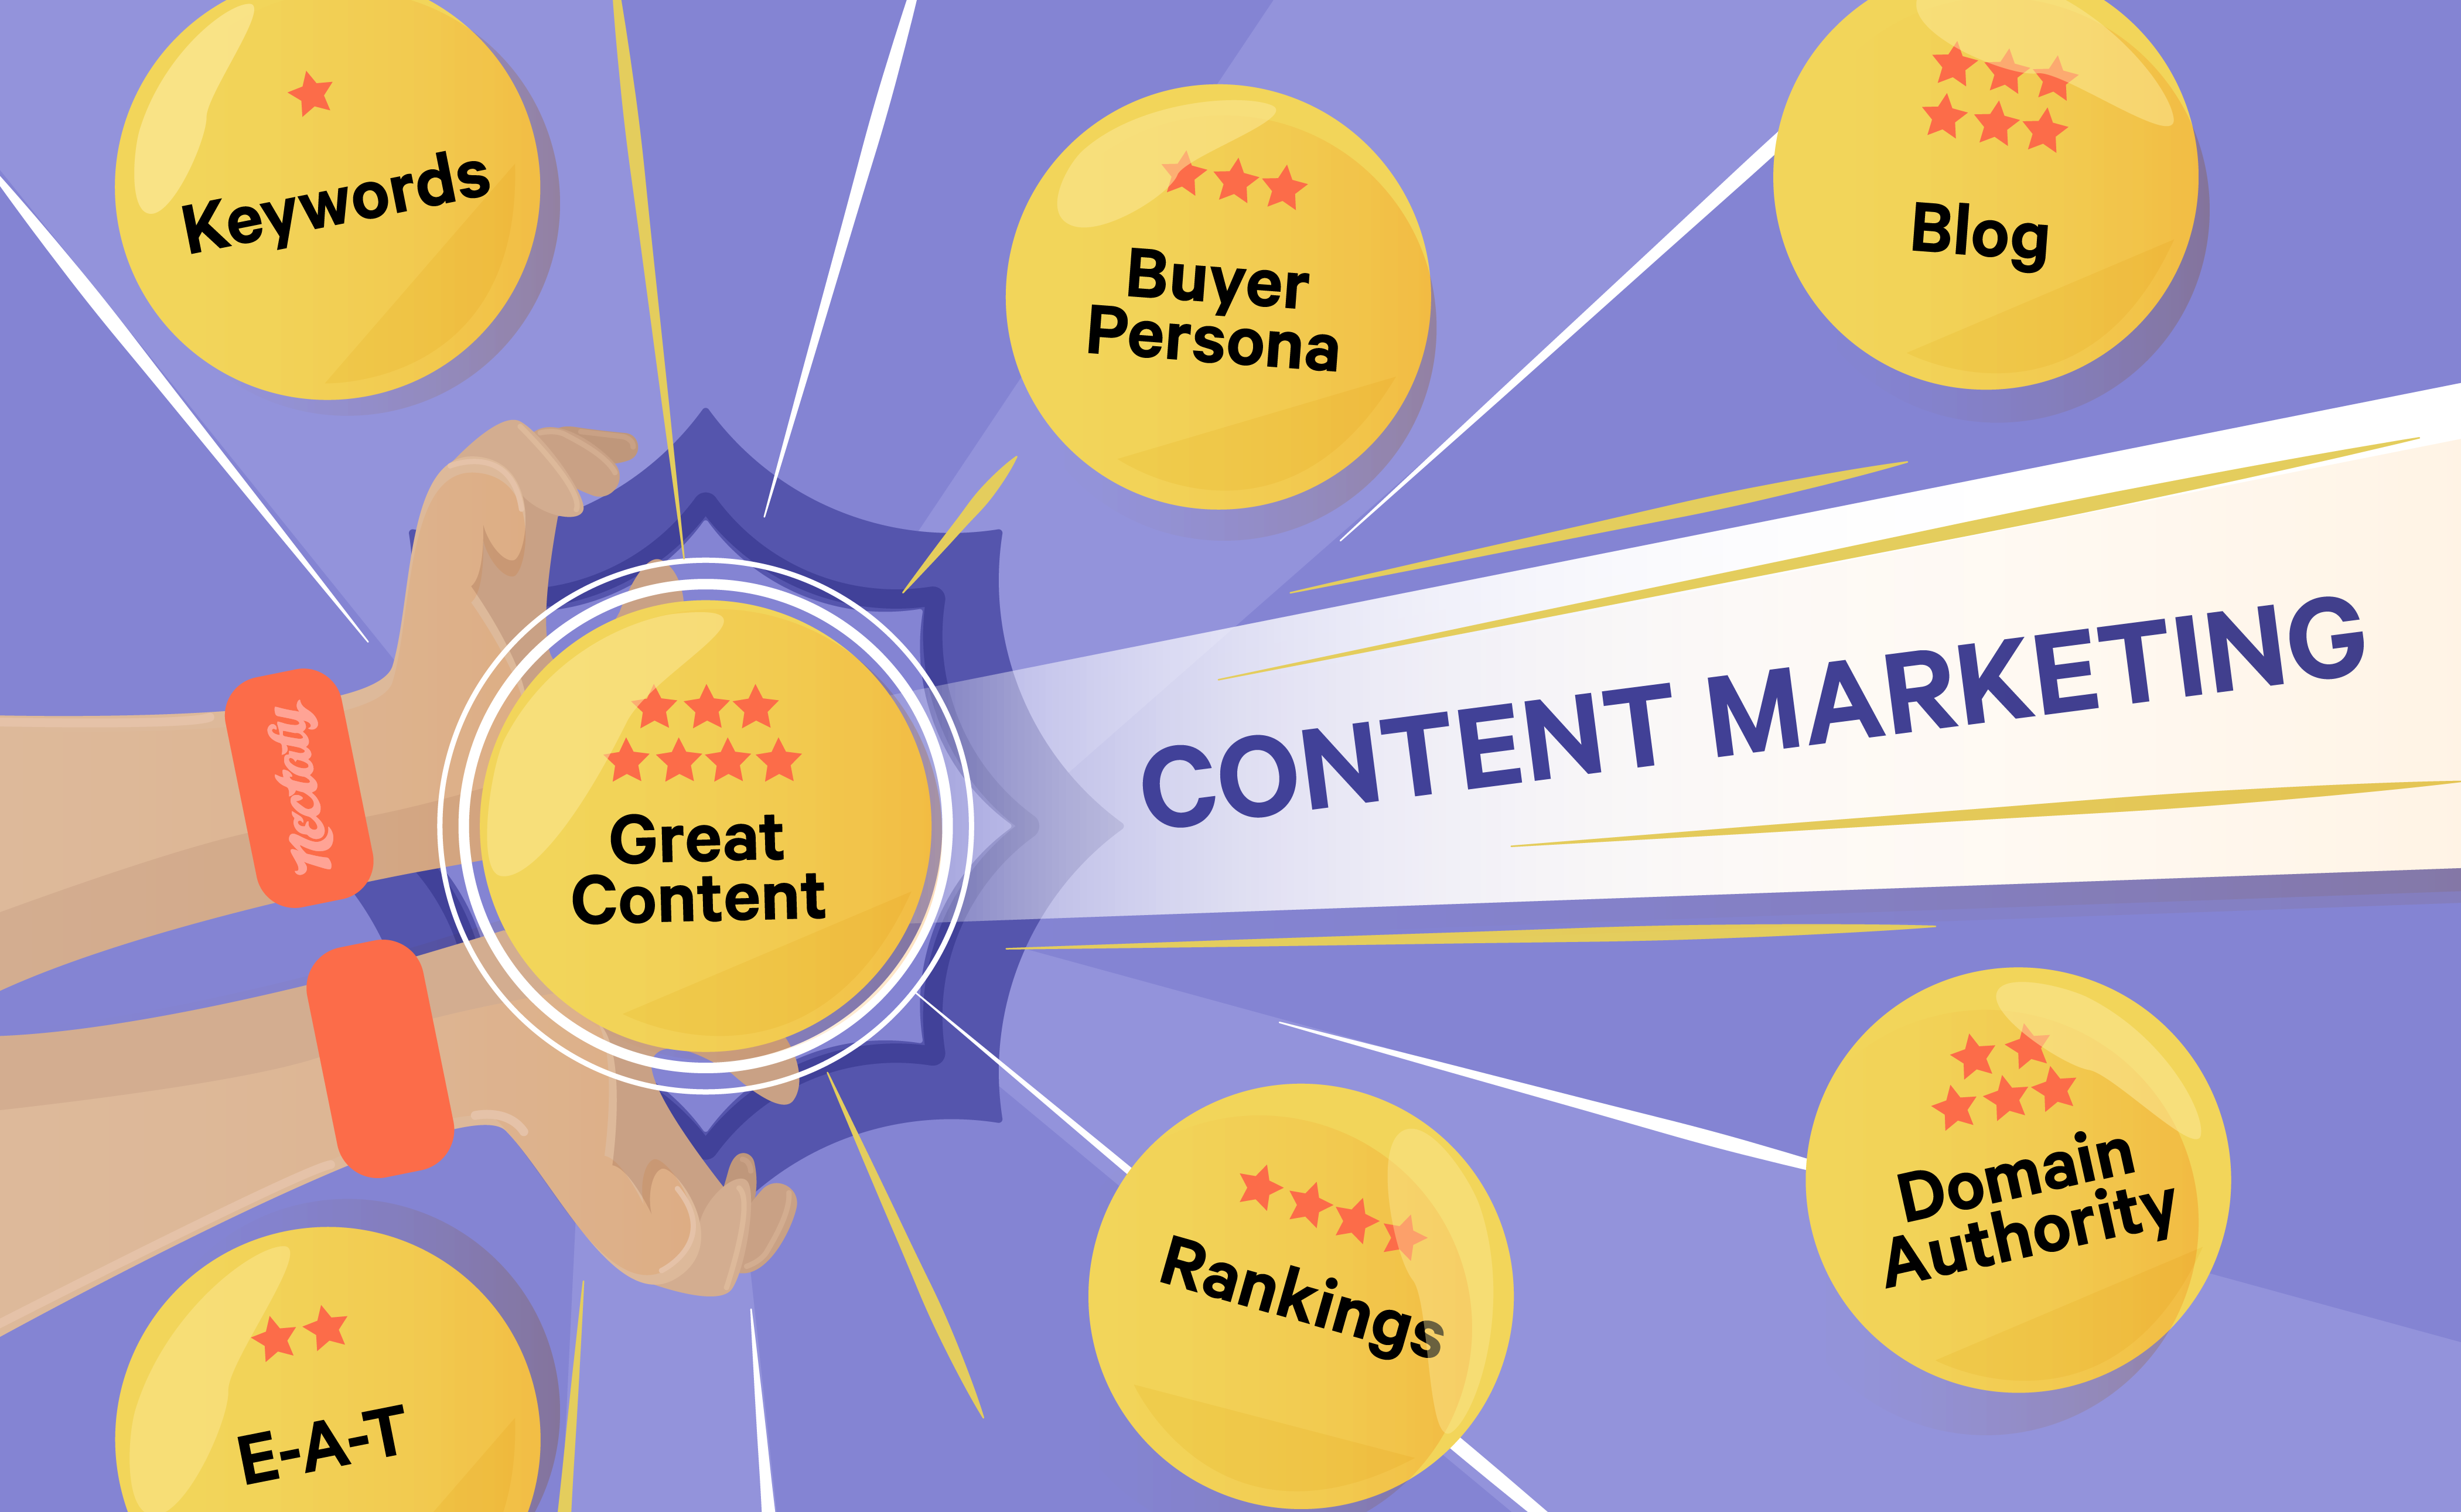 Content Marketing Explained (Dragon Ball Z-style)